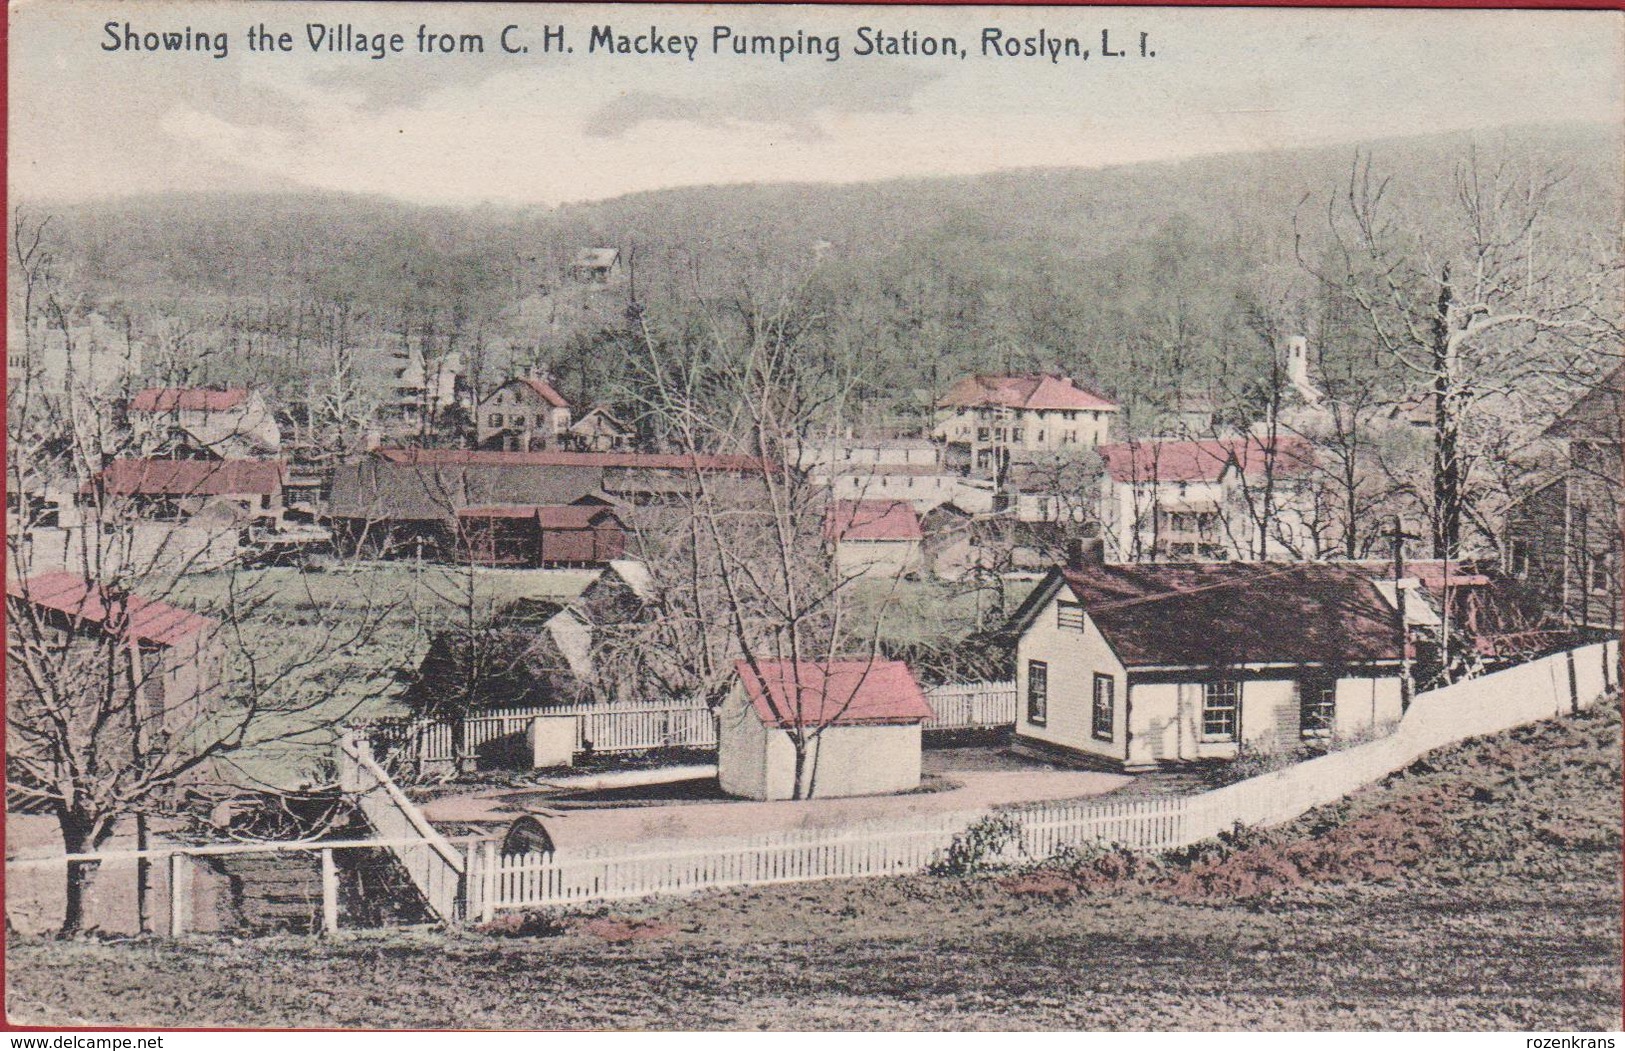 Rare Old Postcard Roslyn Long Island LI Showing The Village From C.H. Pumping Station New York United States USA - Long Island